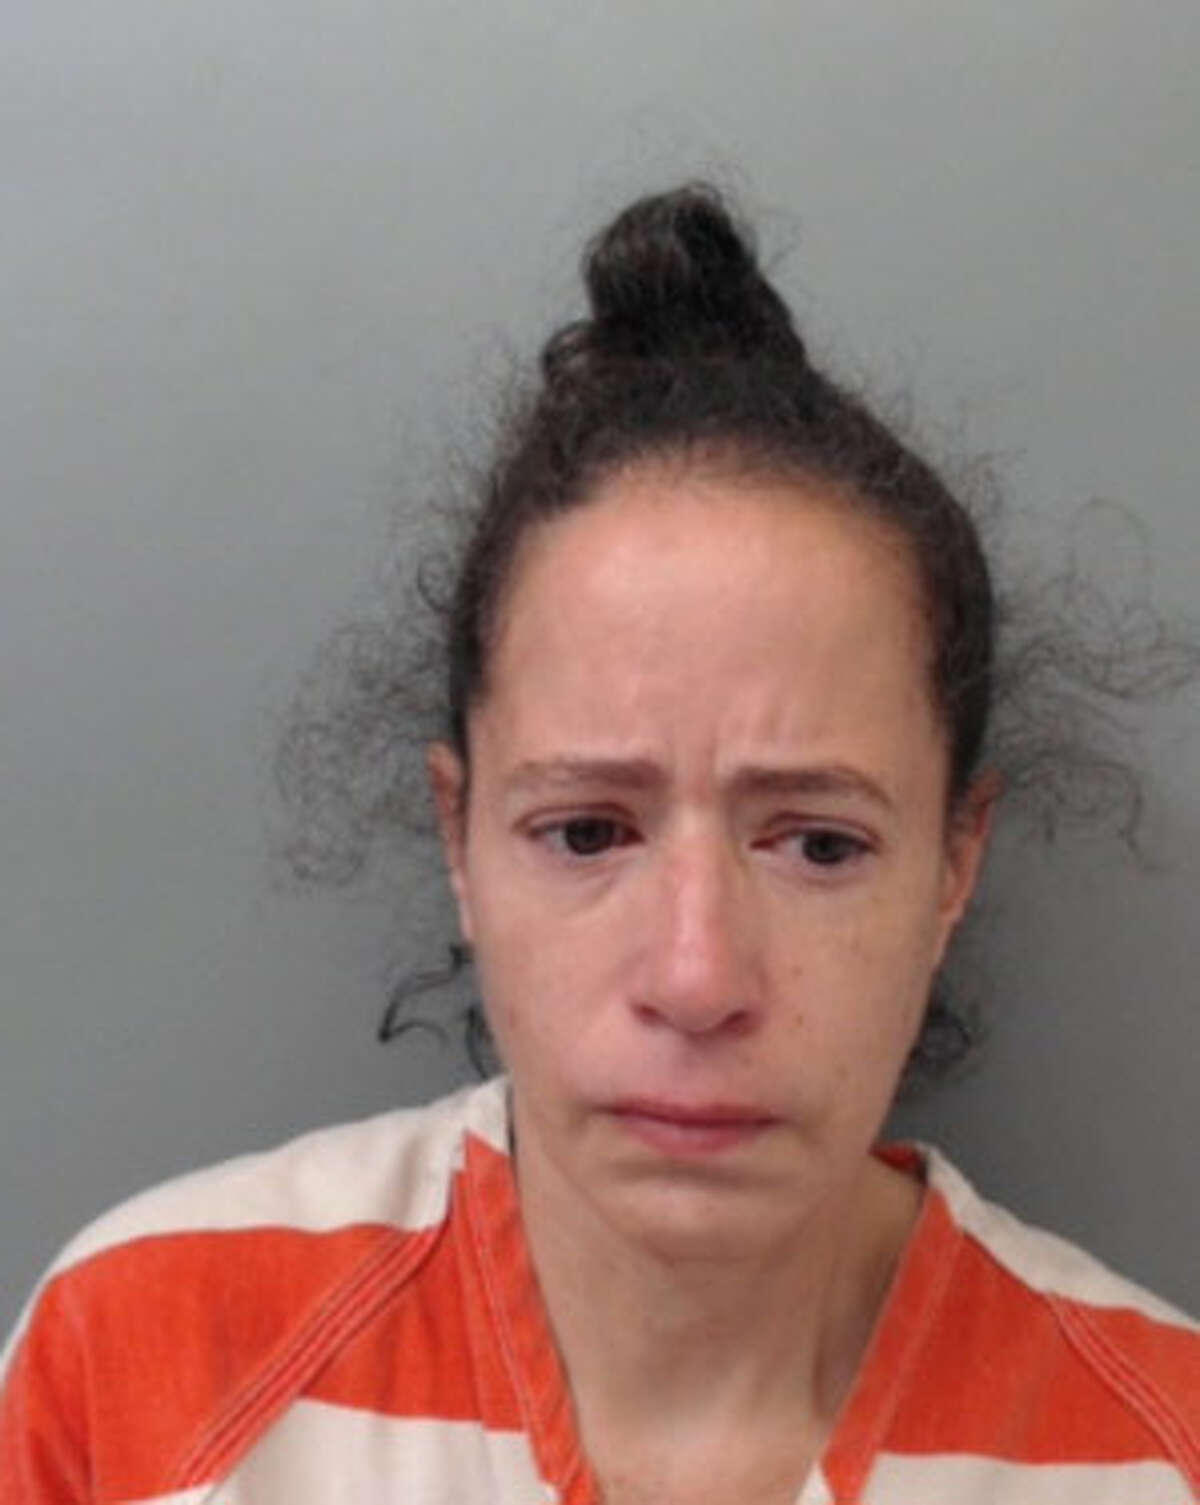 Ana Rosa Marrero Jimenez, 46, was charged with injury to an elderly person, interference with an emergency call, possession of a controlled substance and resisting arrest.